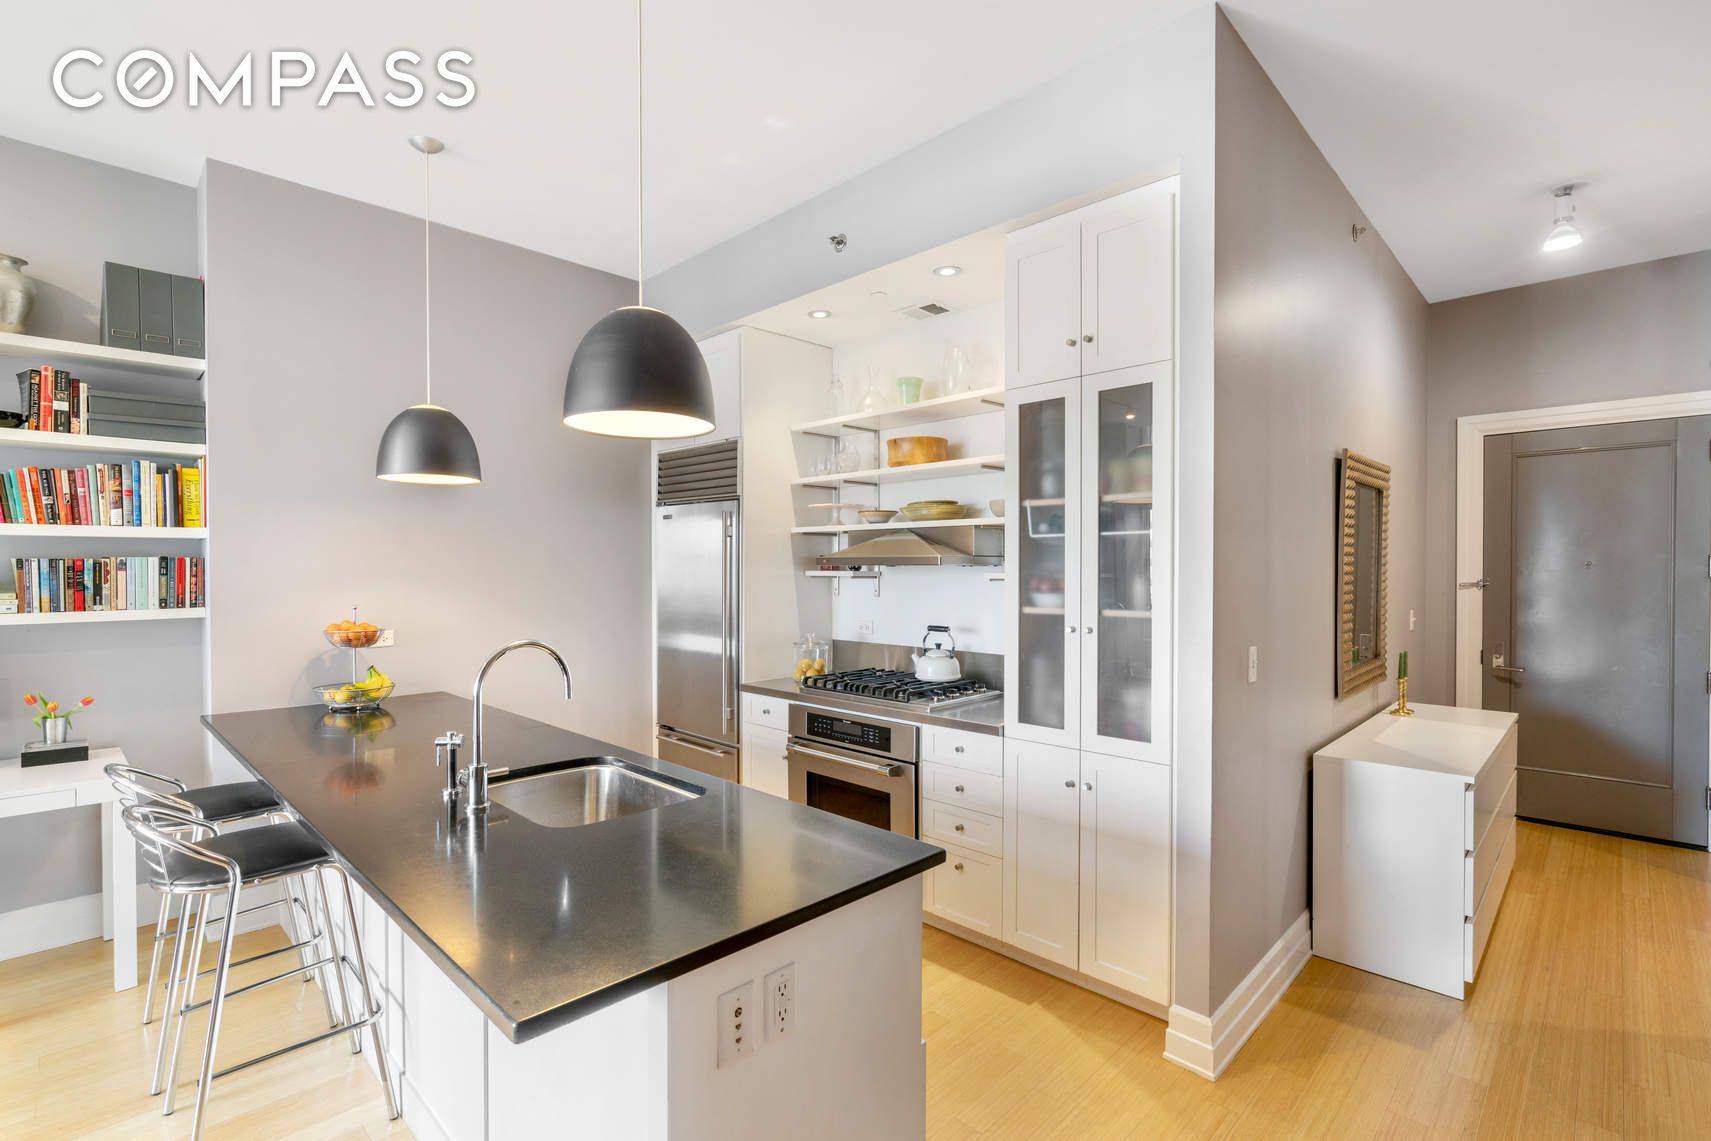 This spacious Junior 1 bedroom loft condo in Downtown Brooklyn has high ceilings, bamboo hardwood floors, a spacious foyer, an in unit washer dryer and lots of sunshine from west ...